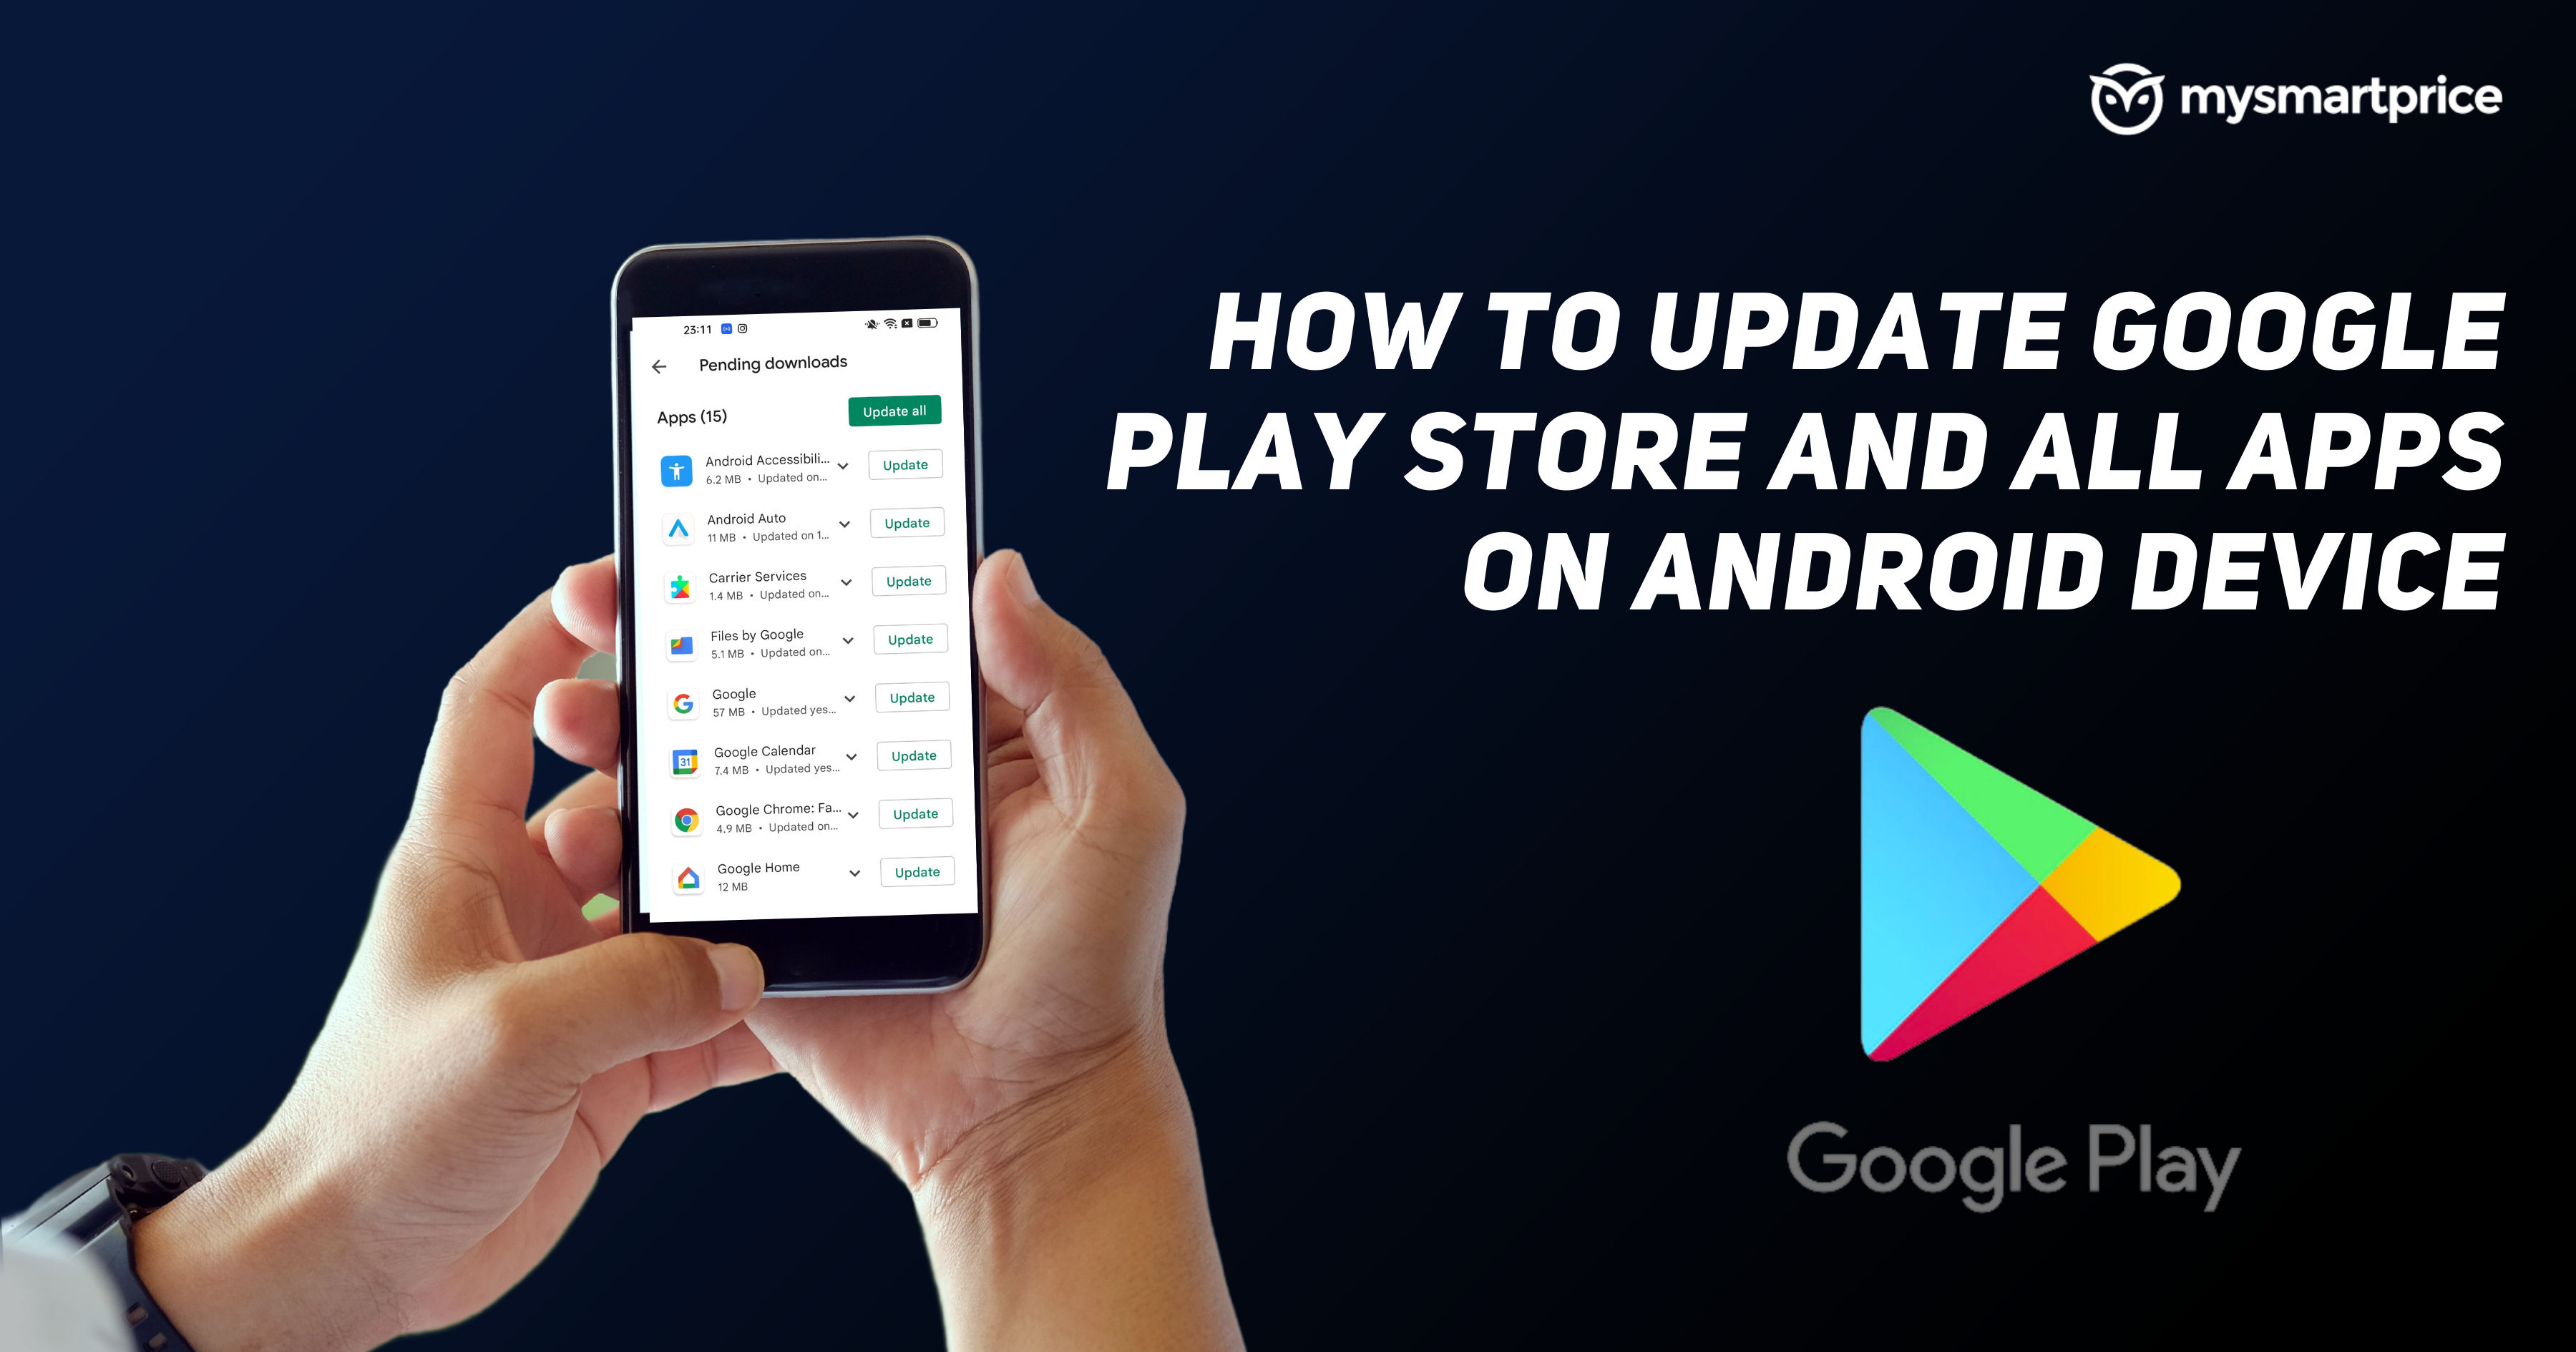 How to Update Google Play Store and Apps on Android? MySmartPrice